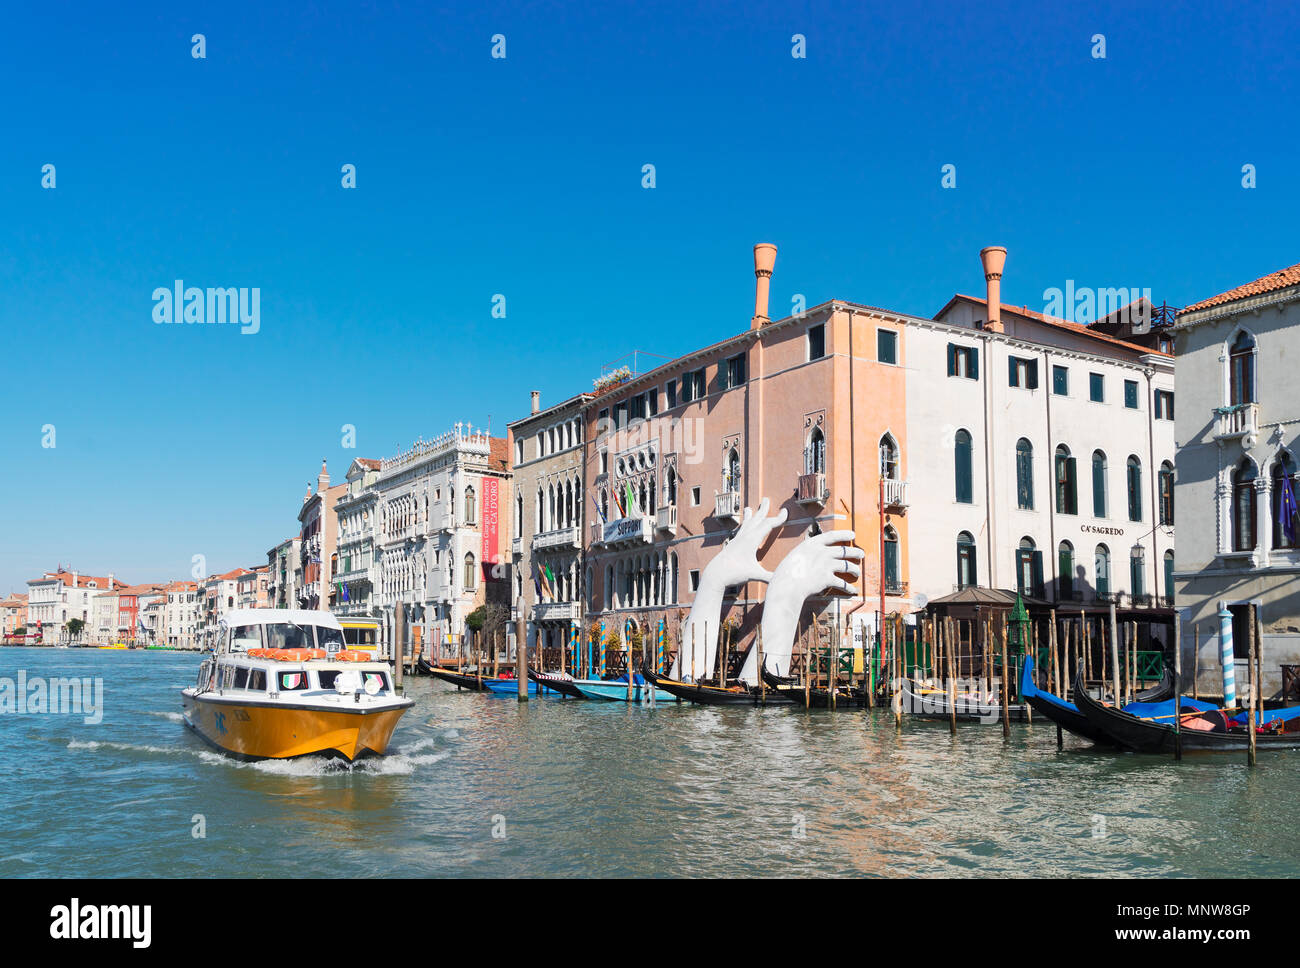 VENICE, ITALY - MARCH 20, 2018: Boatd floting in front of Giant Hands of Venice's Grand Canal in march 20, 2018 Stock Photo